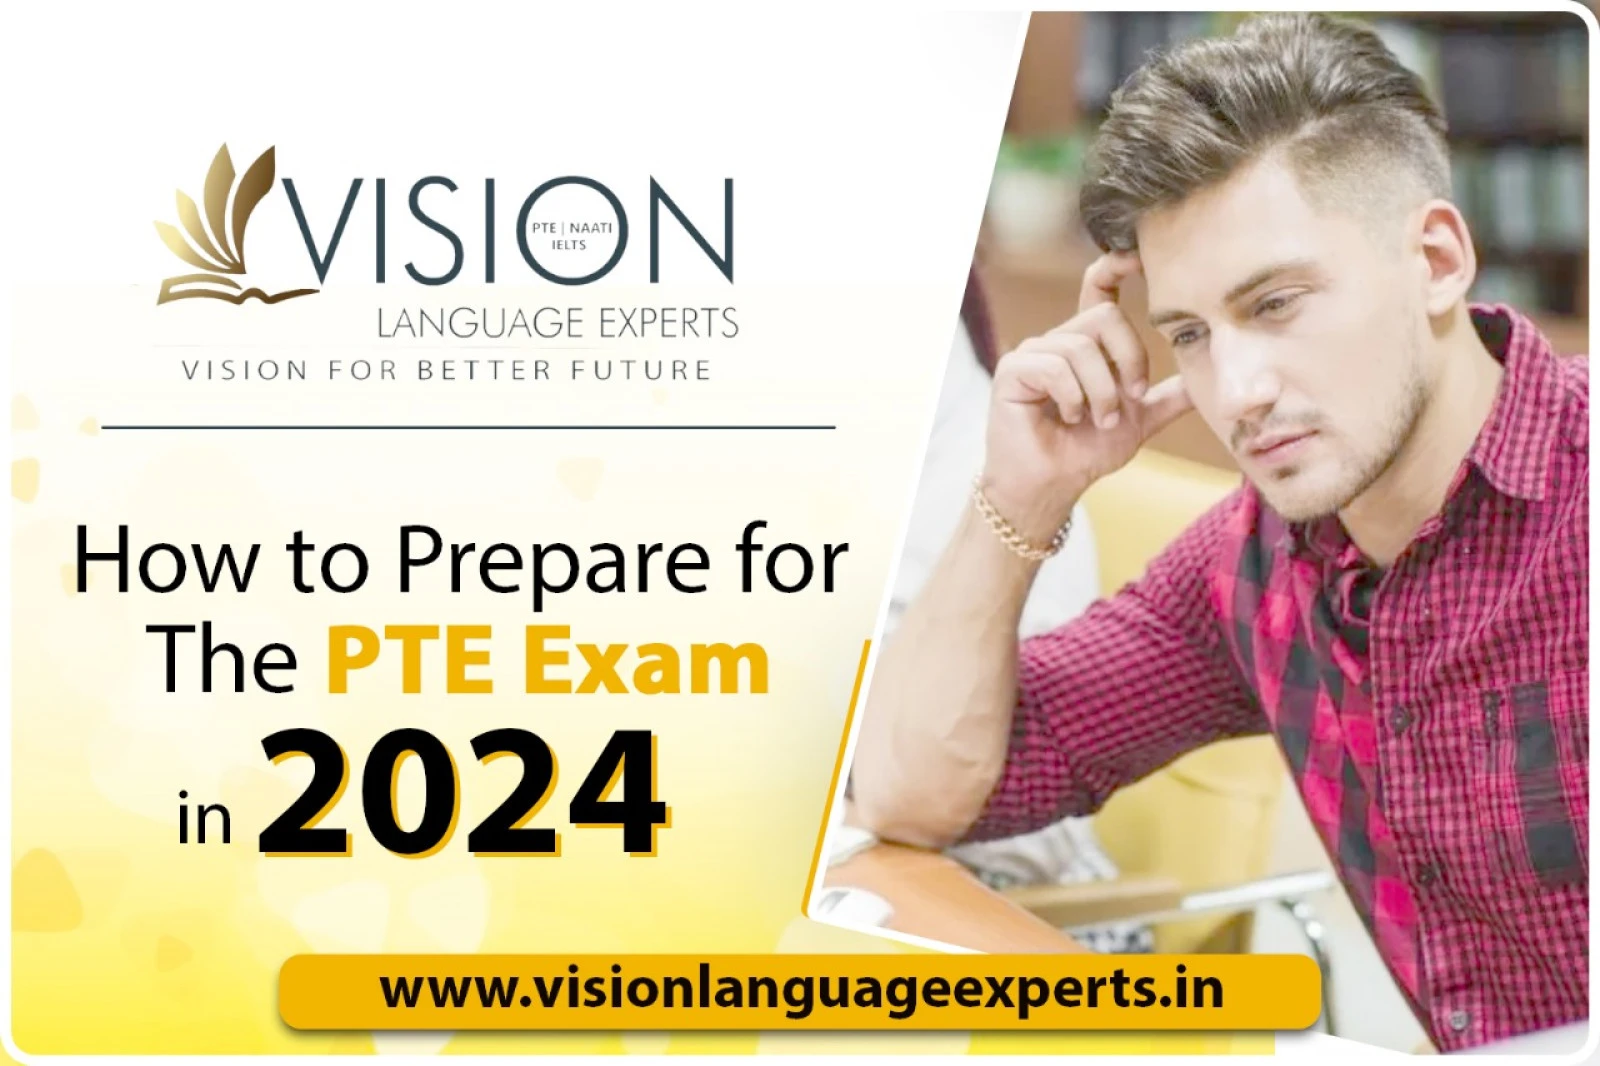 How to Prepare for the PTE Exam in 2024?